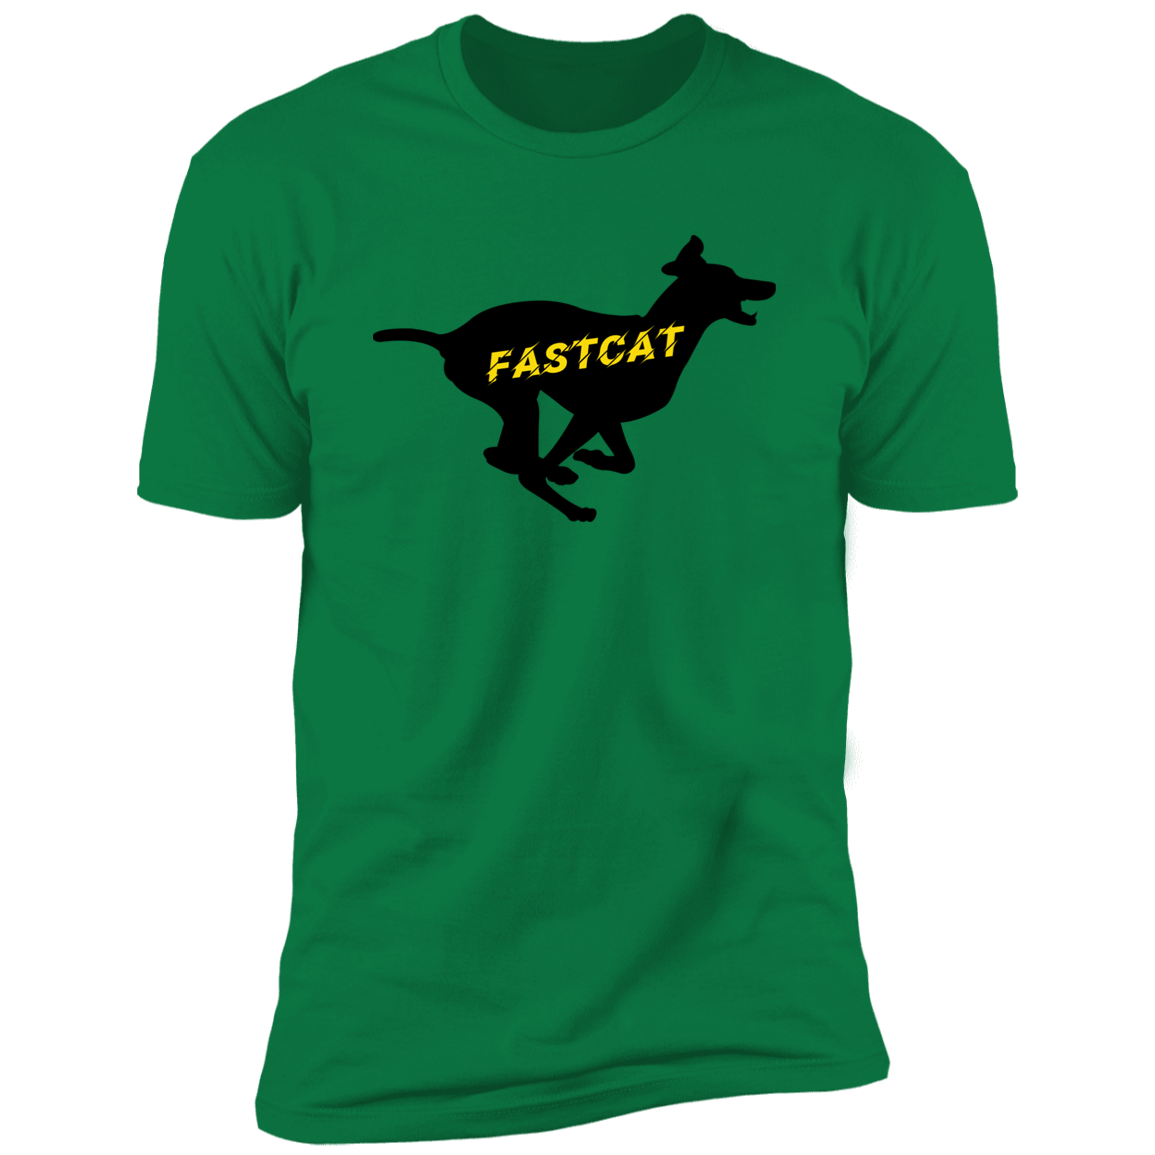 FastCAT Dog T-shirt, sporting dog t-shirt for humans, FastCAT t-shirt, in kelly green